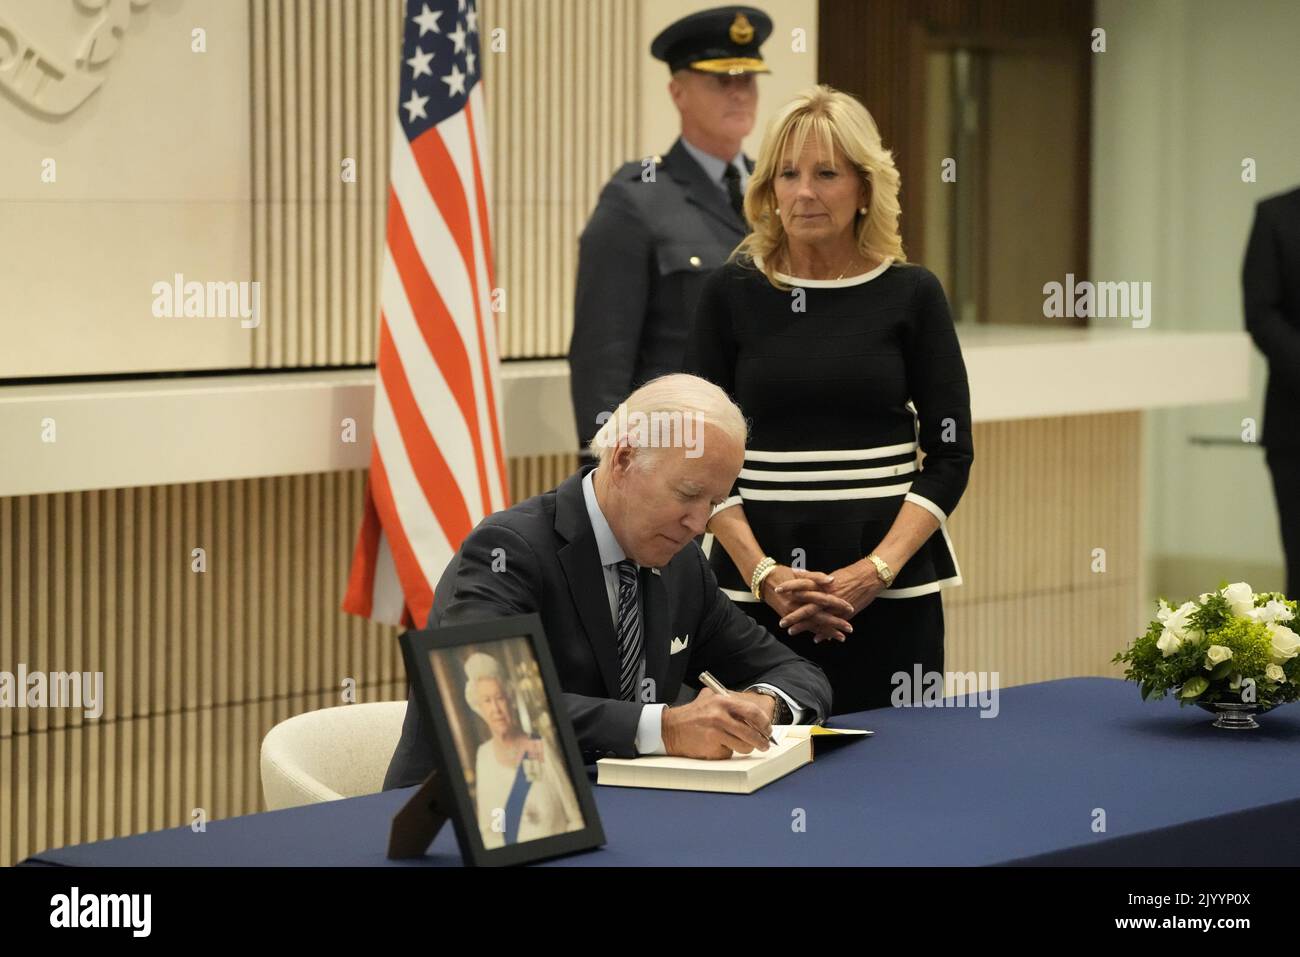 Washington, United States. 08th Sep, 2022. United States President Joe Biden and first lady Dr. Jill Biden sign the condolence book during their visit to the British Embassy in Washington, DC to pay respects following the passing of Queen Elizabeth II on Thursday, September 8, 2022. Photo by Chris Kleponis/UPI Credit: UPI/Alamy Live News Stock Photo